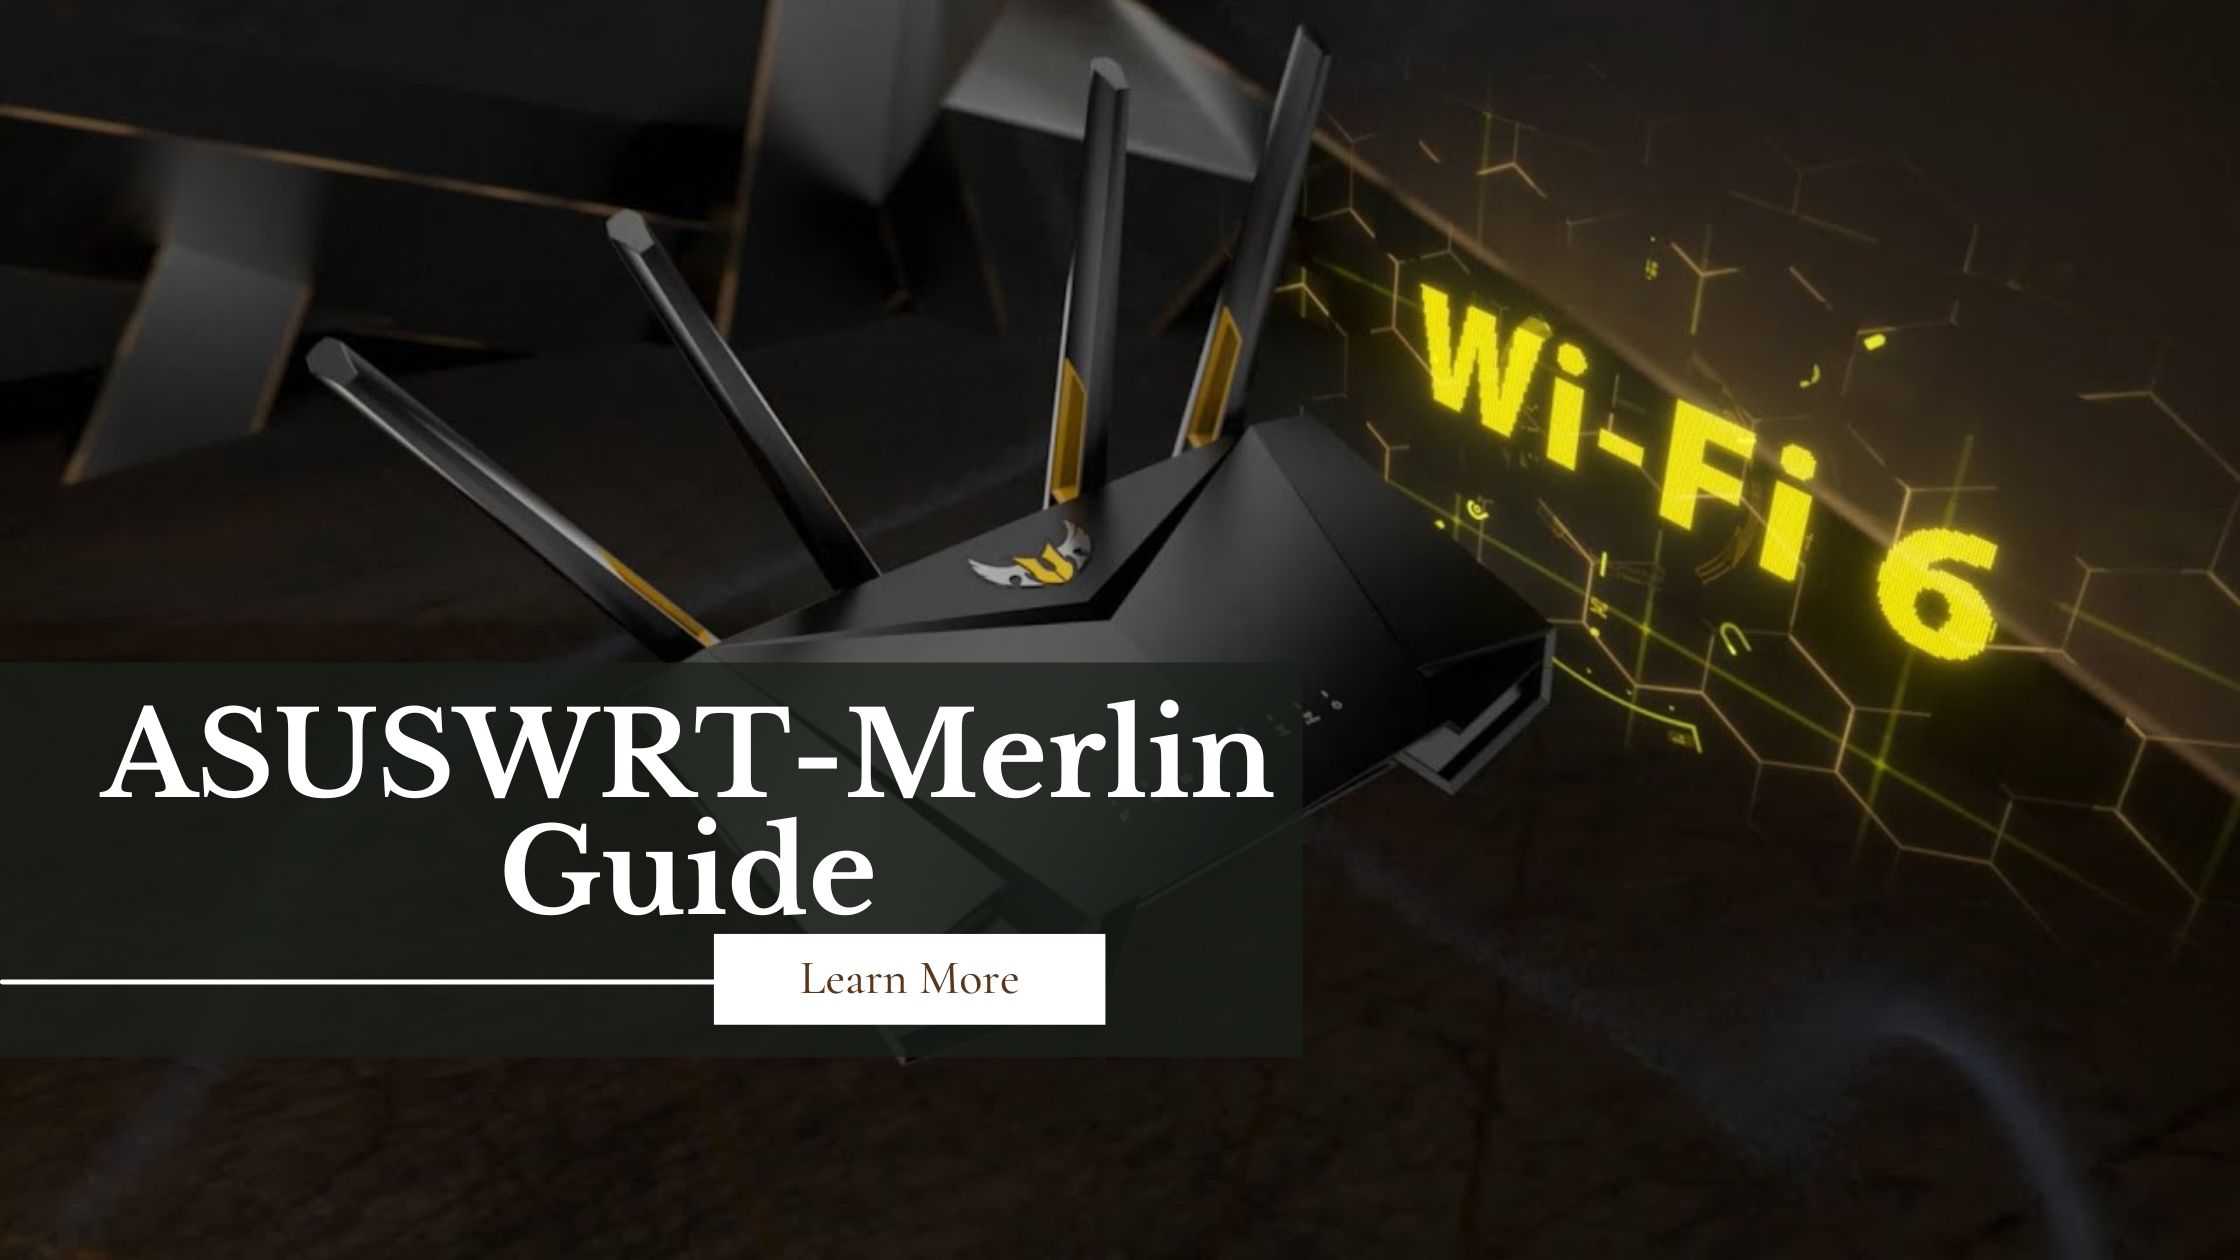 ASUSWRT-Merlin: Guide to Elevating Your Home Network Experience